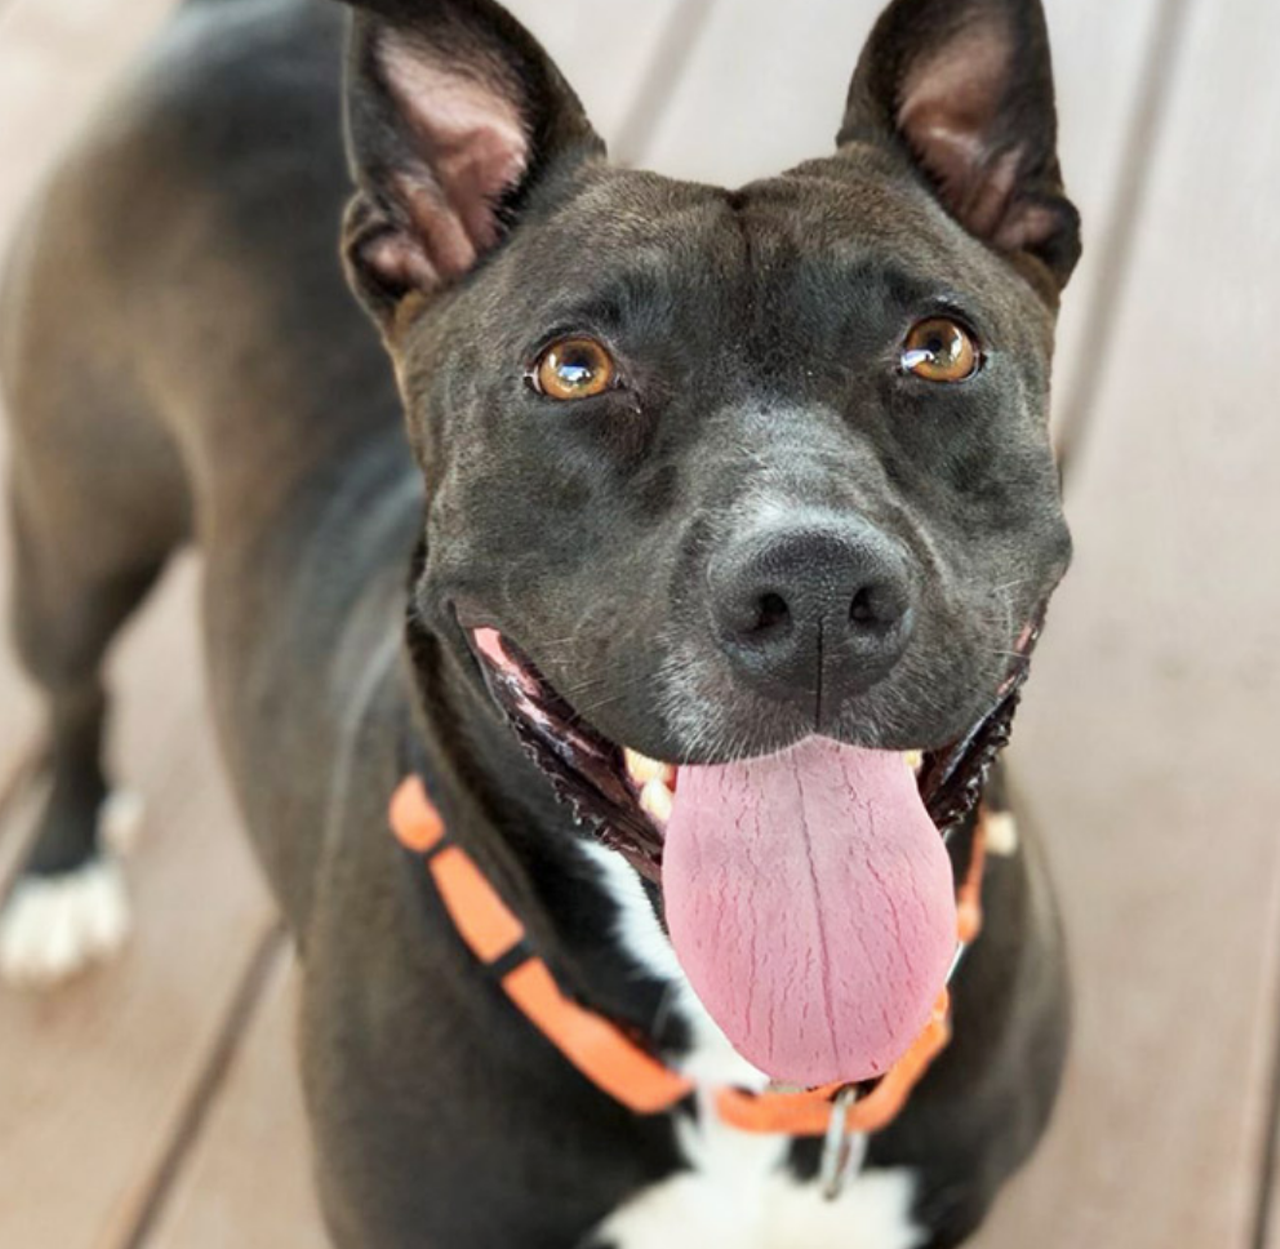 Tala
"Hi, I’m Tala! I’m a chunky yet funky girl who is looking for my forever home. I am very energetic and love to play fetch! I walk very well on a leash, so walks are a breeze for me. Come visit me and let’s go for a walk!"